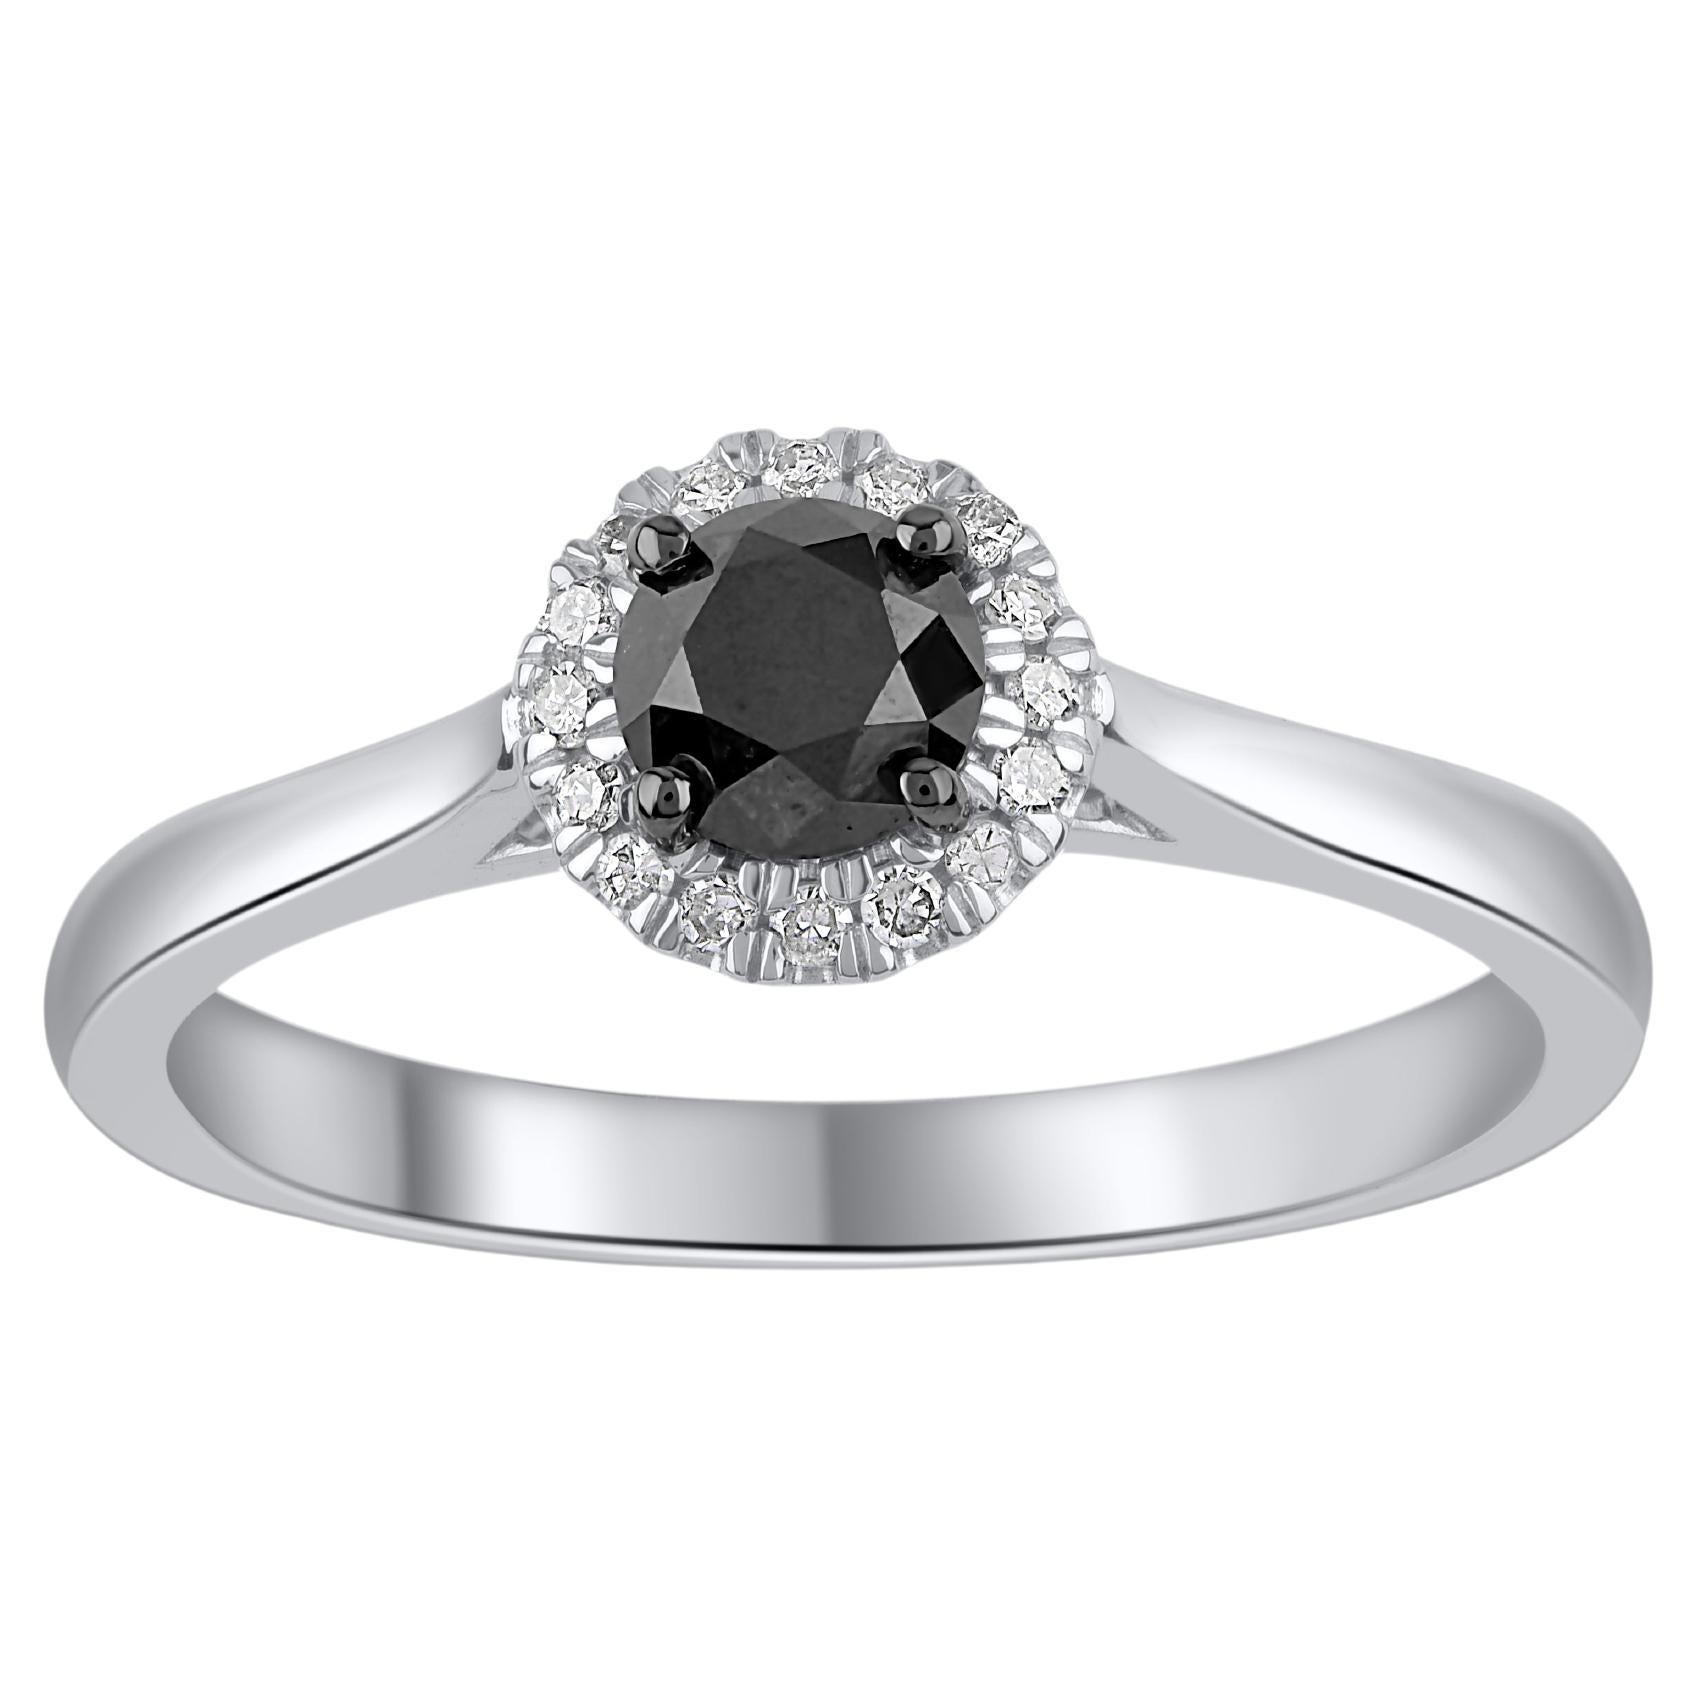 TJD 0.63 Carat White Diamond and Treated Black Diamond 14KT White Gold Halo Ring For Sale